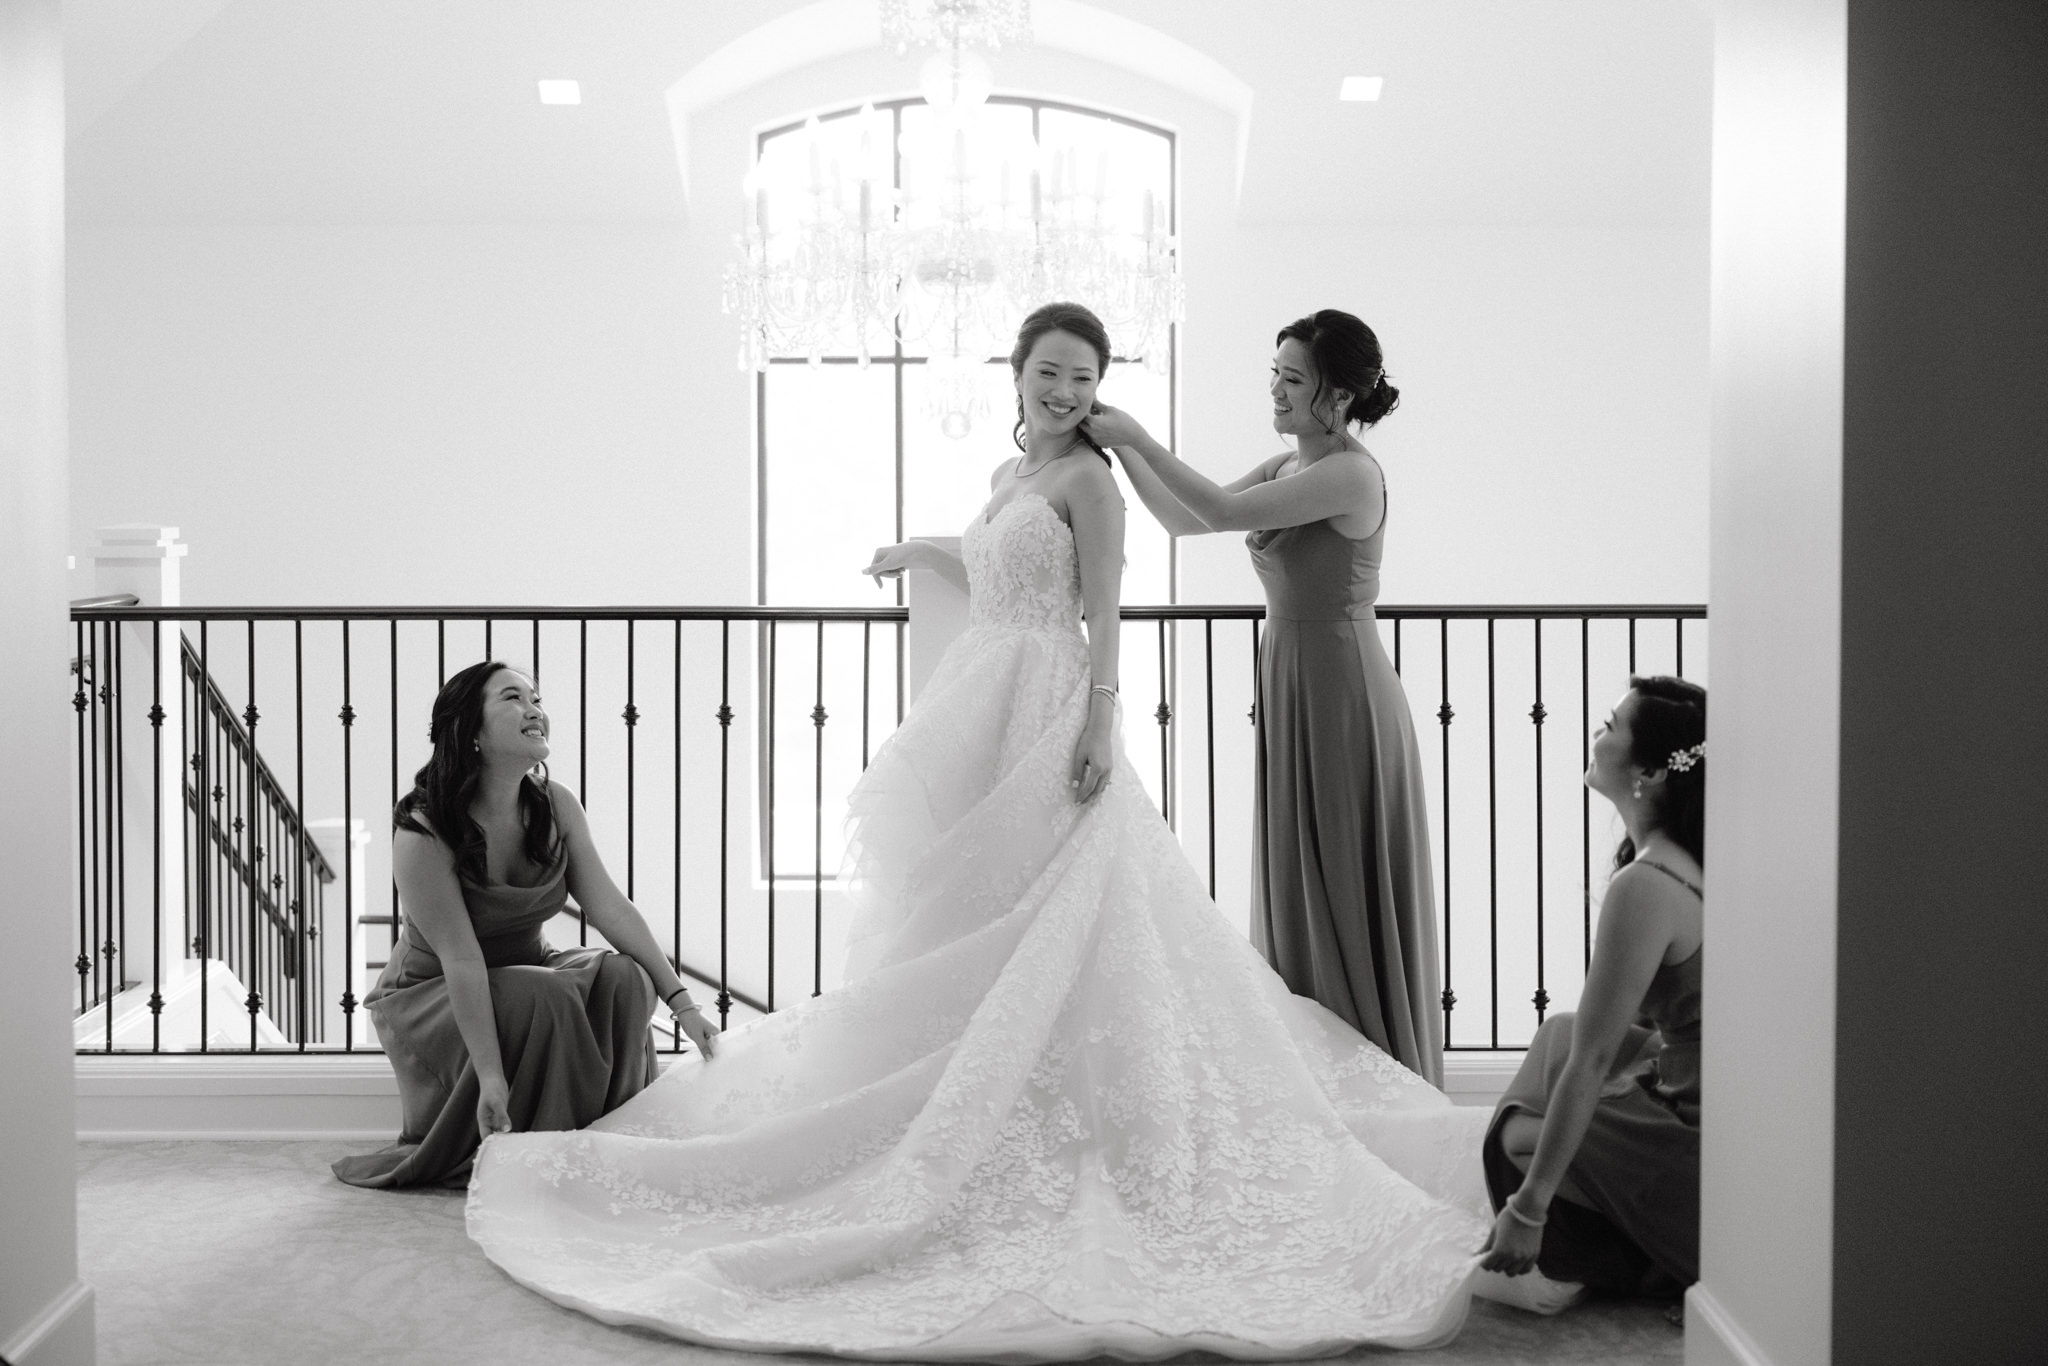 The bridesmaids are fixing the bride's dress and hair before the wedding. Wedding venue image by Jenny Fu Studio